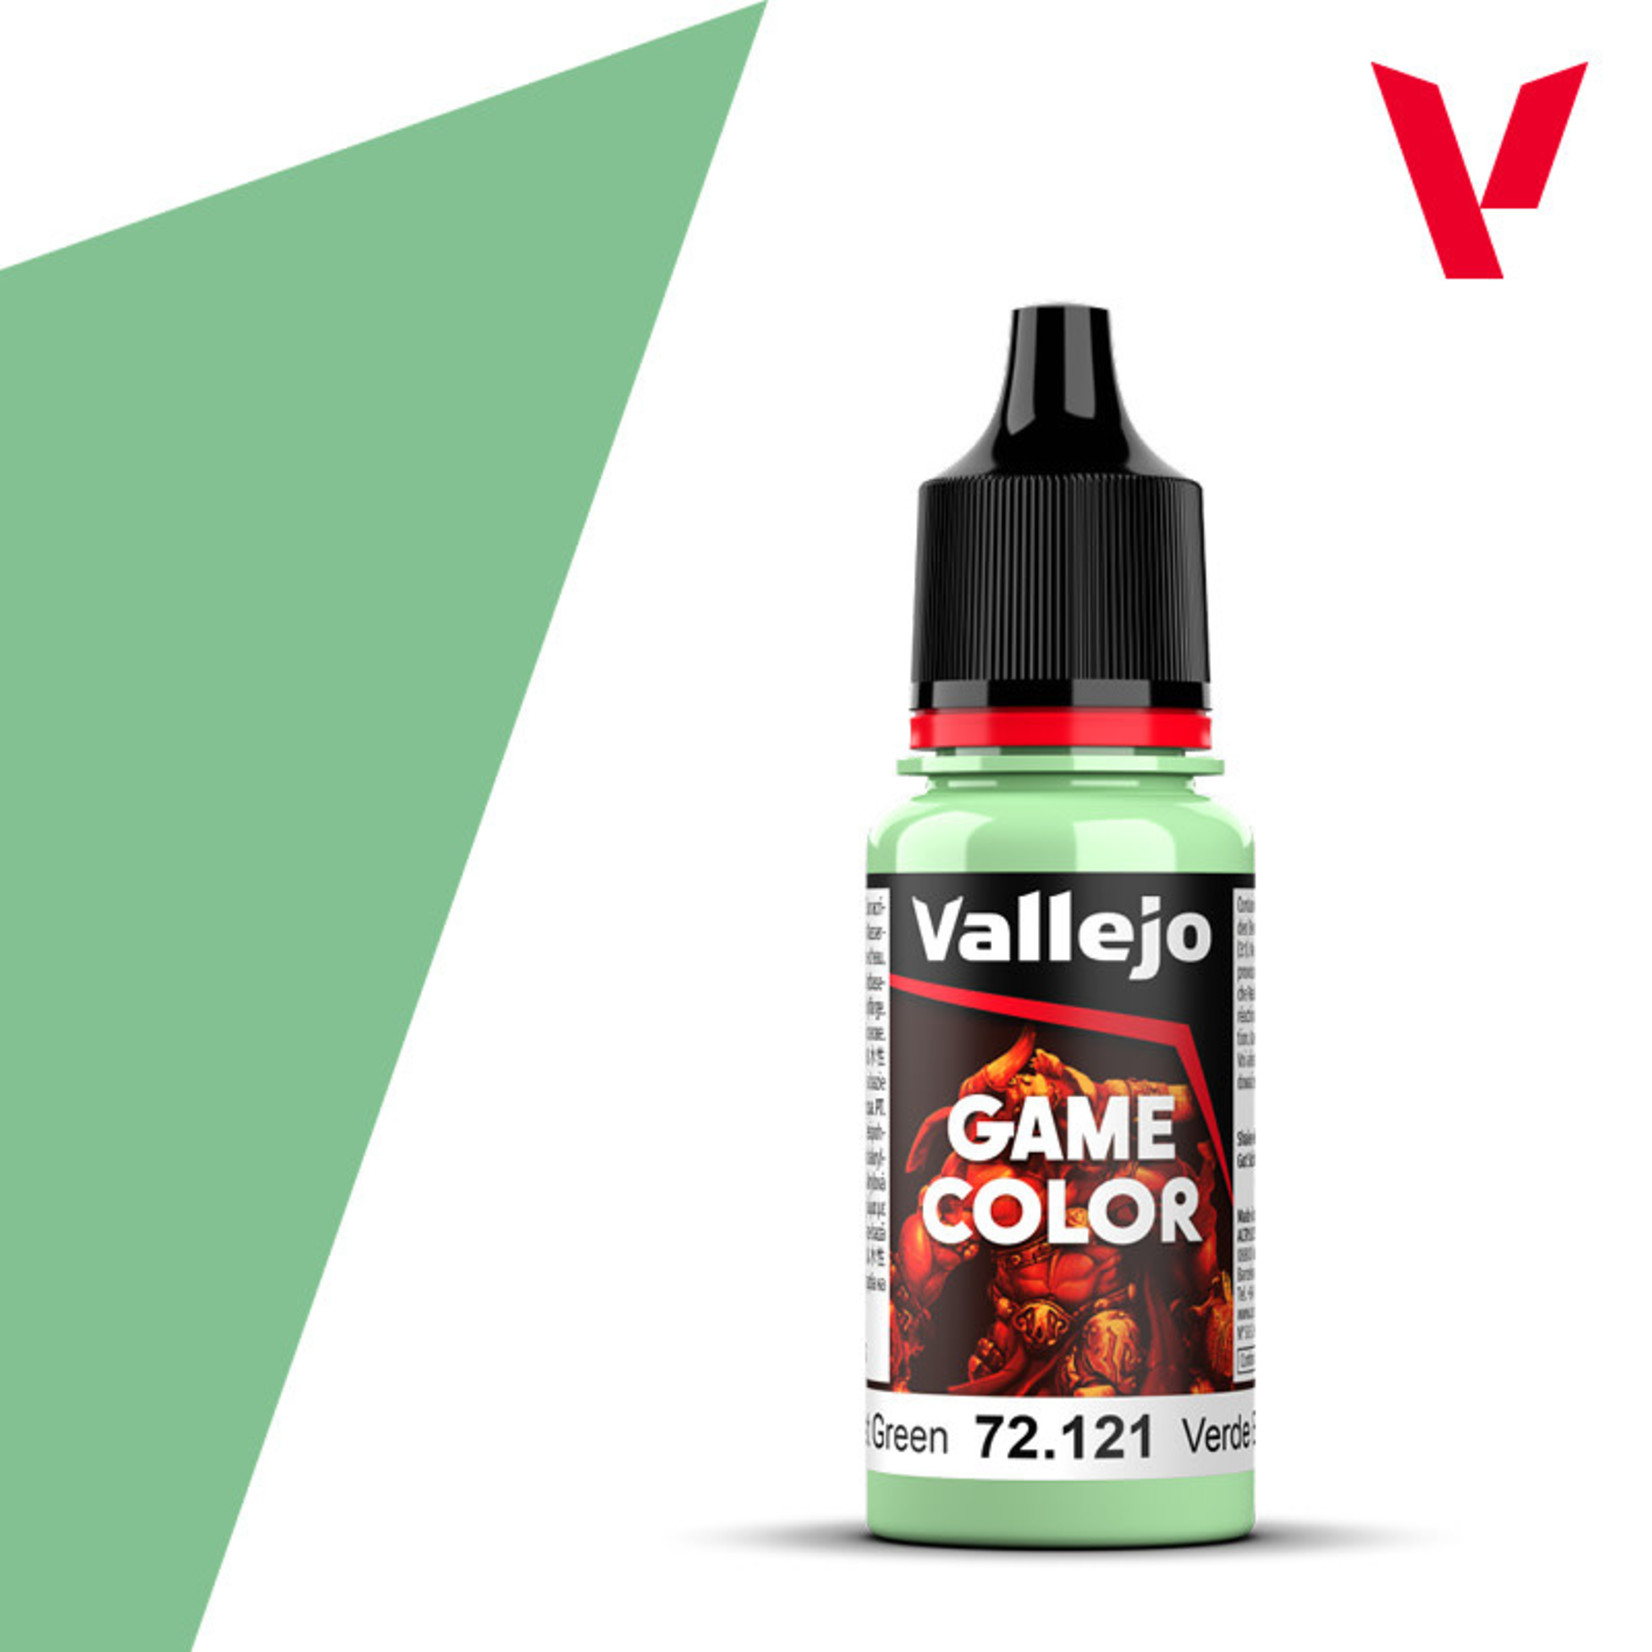 Vallejo Game Color Ghost Green